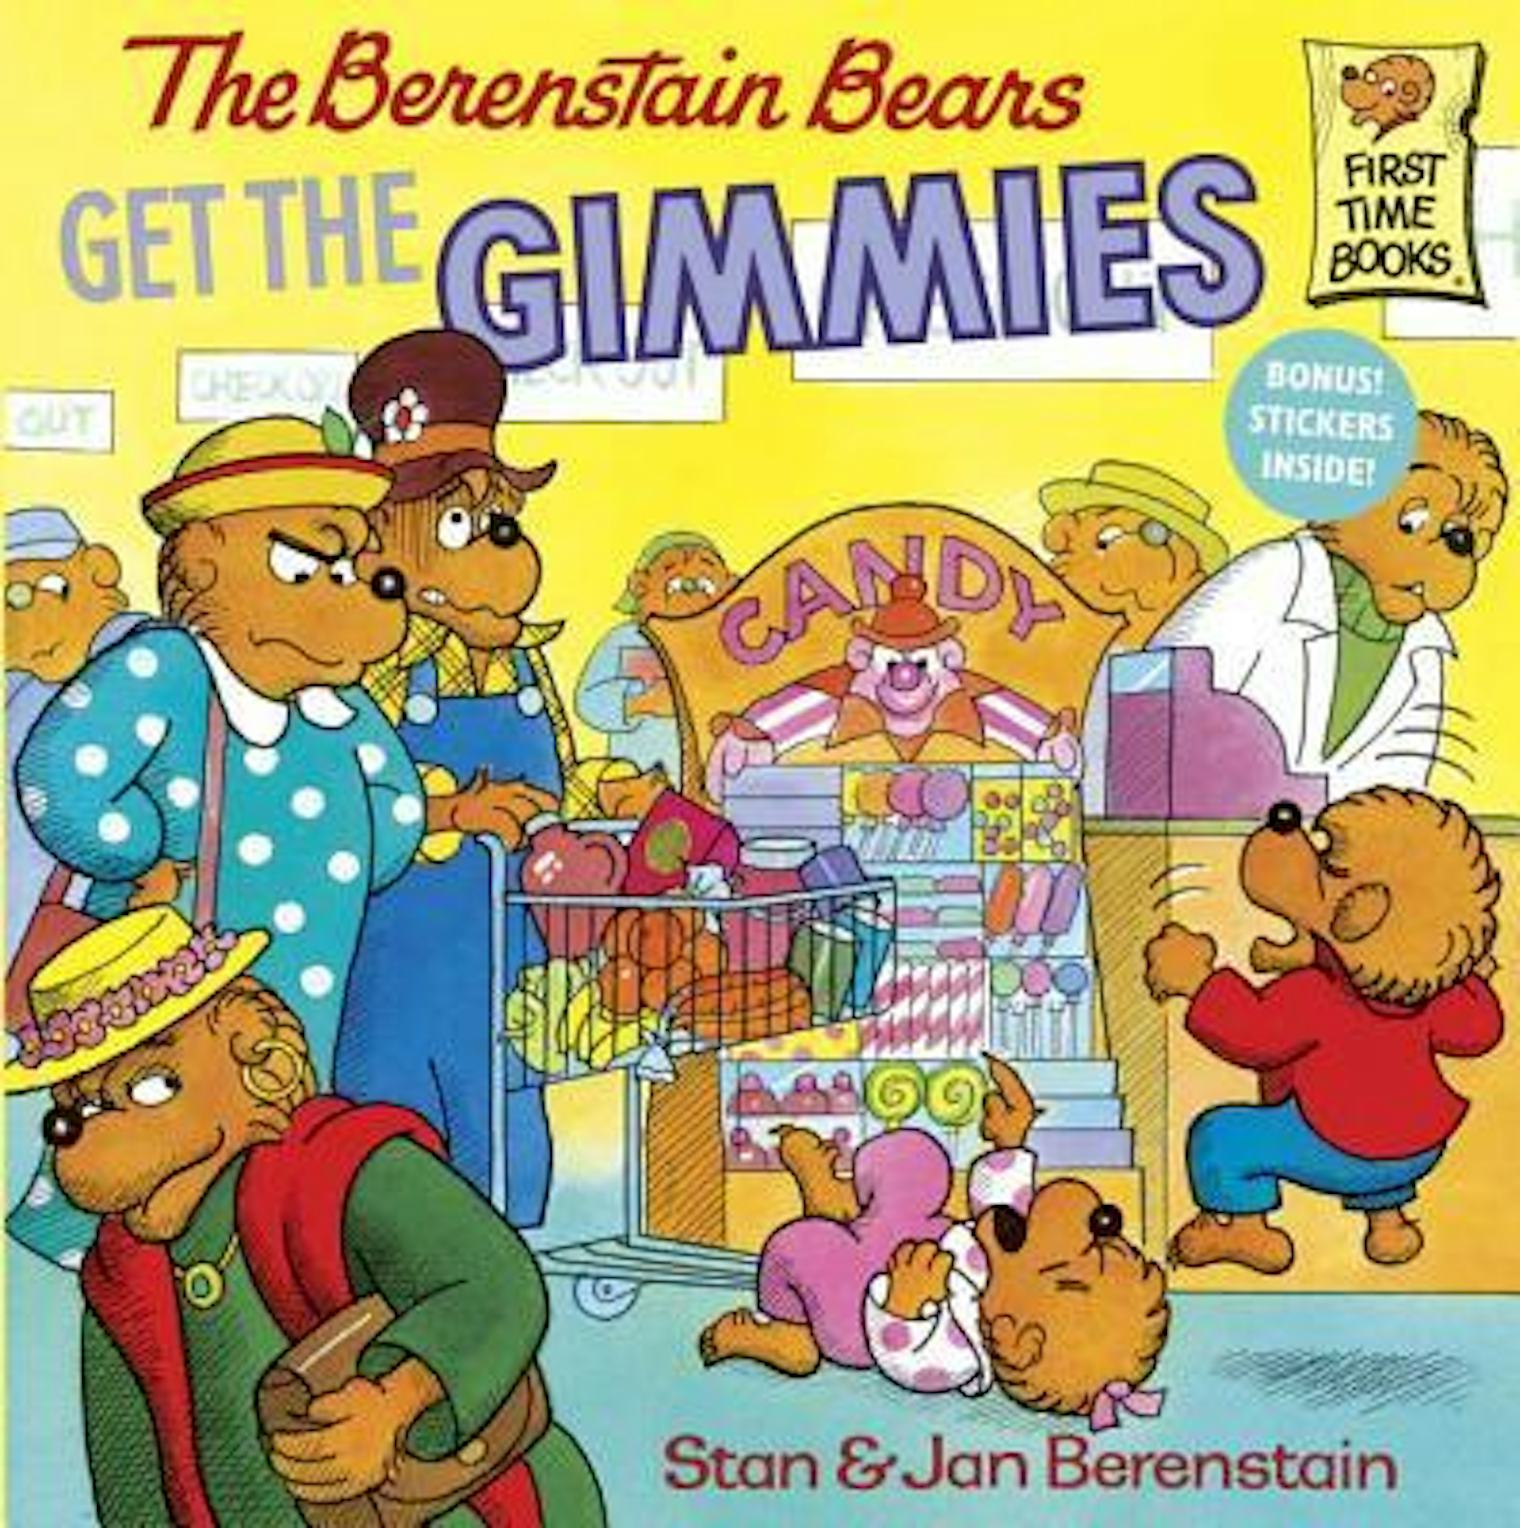 12 Berenstain Bears Books That Taught Us Lessons We Can Actually Still Use